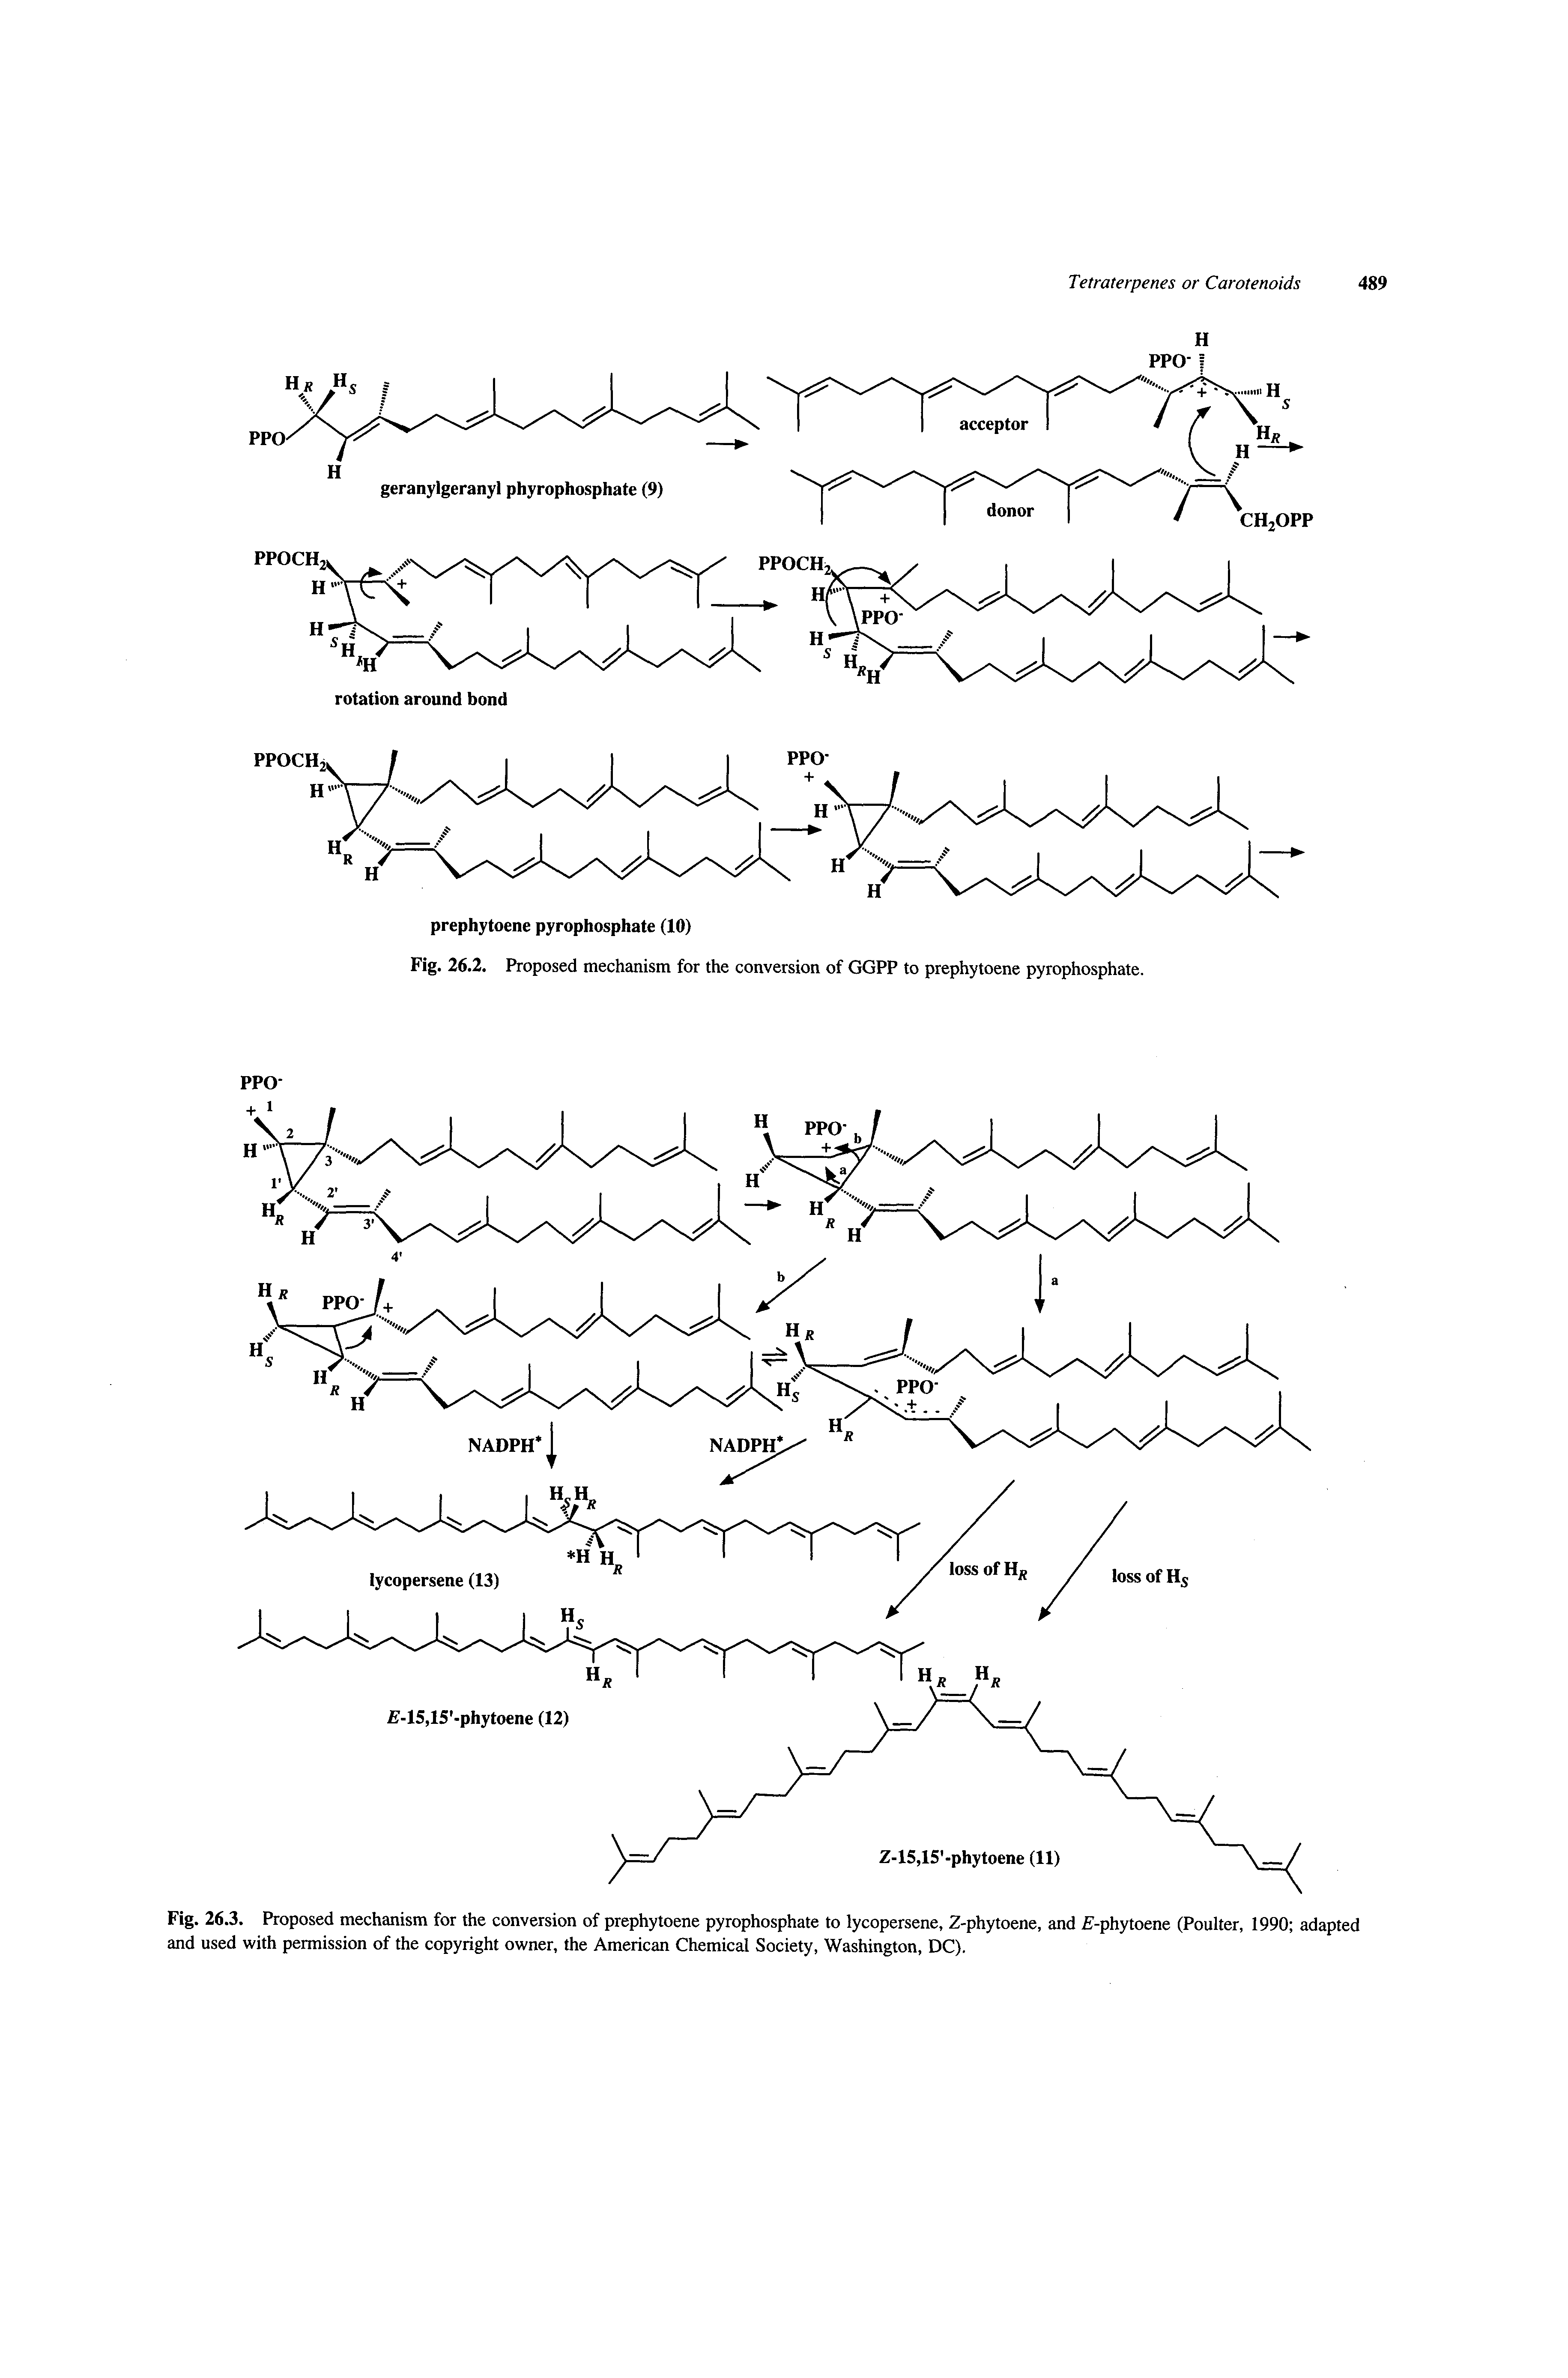 Fig. 26.3. Proposed mechanism for the conversion of prephytoene pyrophosphate to lycopersene, Z-phytoene, and -phytoene (Poulter, 1990 adapted and used with permission of the copyright owner, the American Chemical Society, Washington, DC).